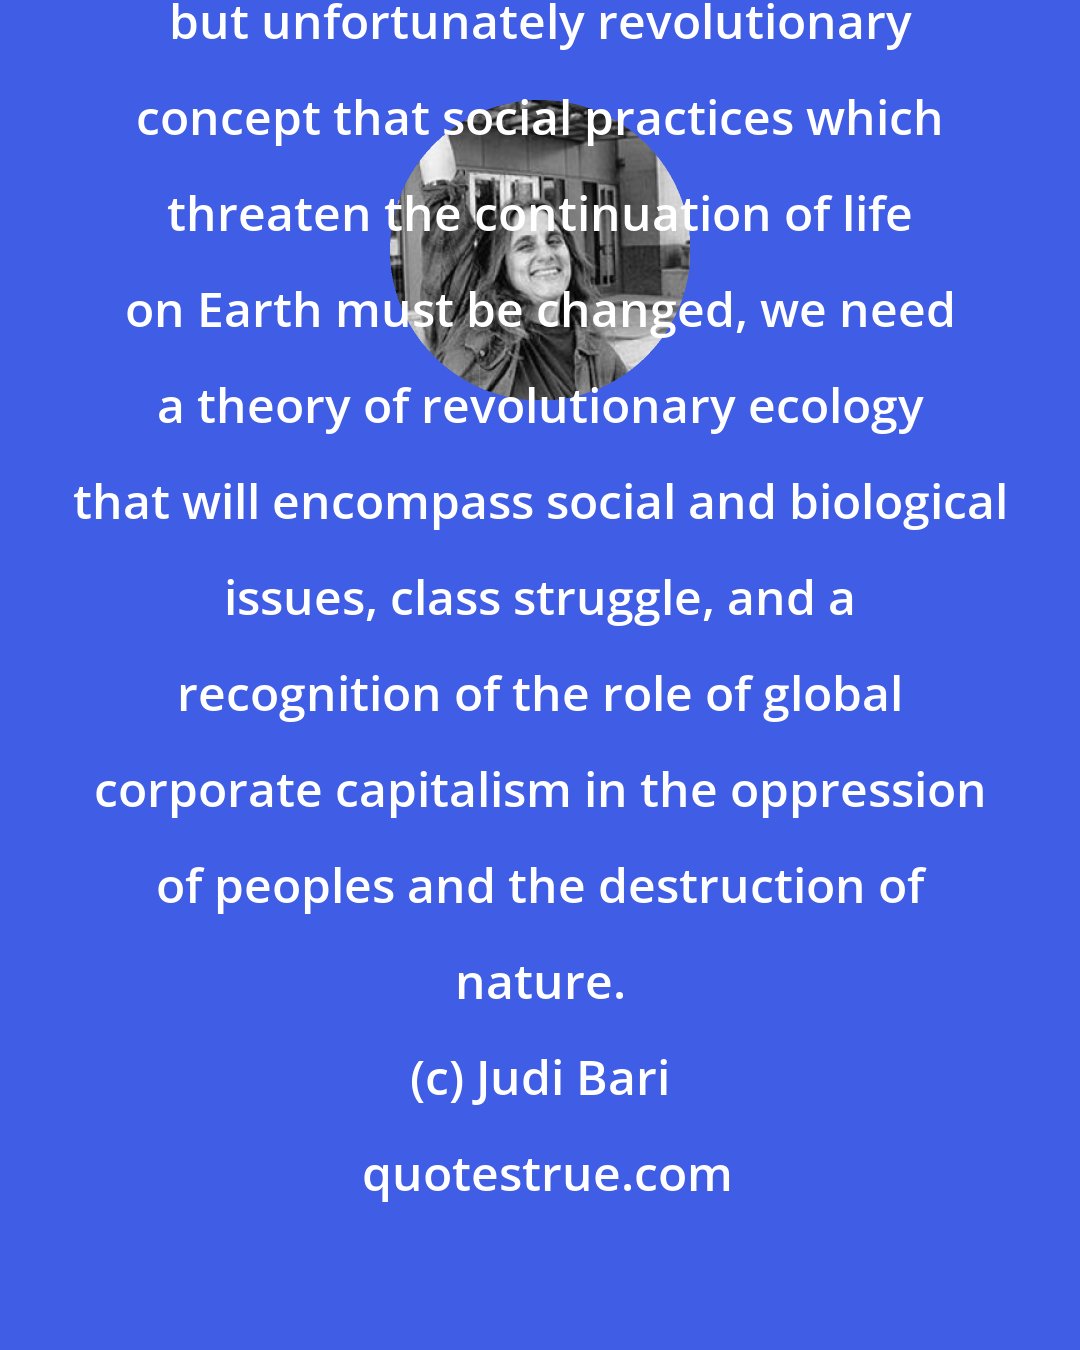 Judi Bari: Starting from the very reasonable, but unfortunately revolutionary concept that social practices which threaten the continuation of life on Earth must be changed, we need a theory of revolutionary ecology that will encompass social and biological issues, class struggle, and a recognition of the role of global corporate capitalism in the oppression of peoples and the destruction of nature.